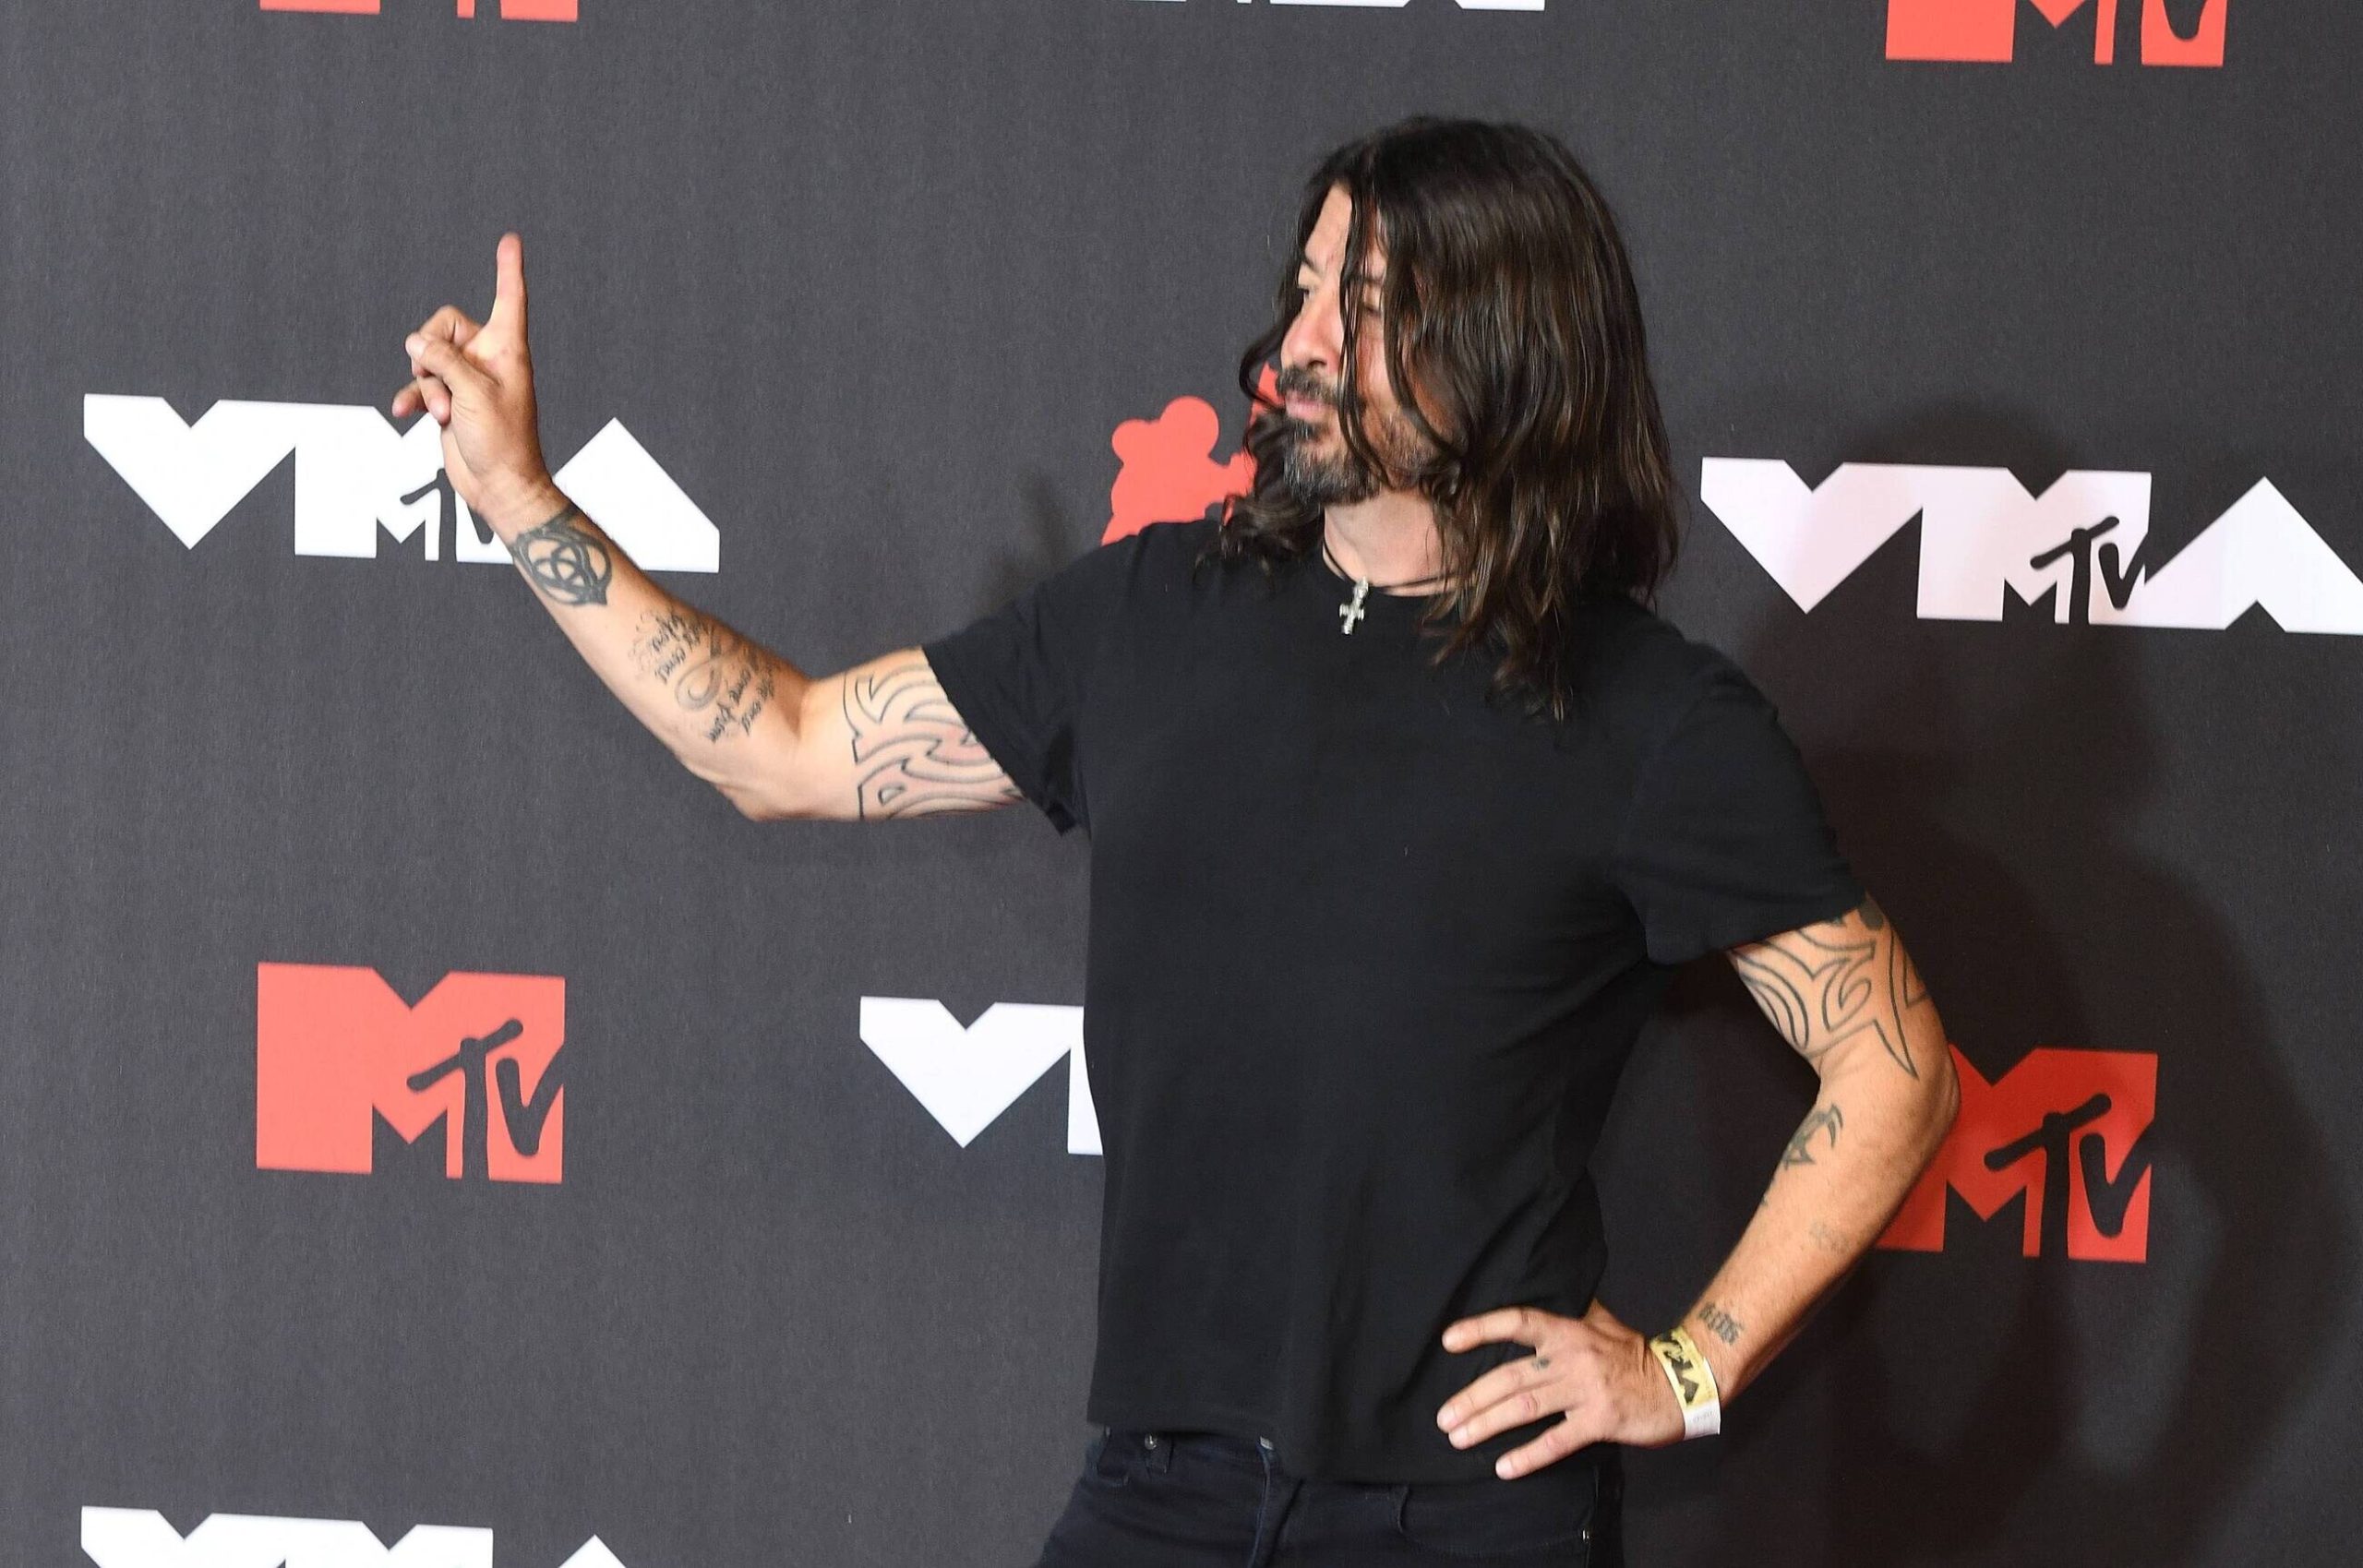 Dave Grohl and the Foo Fighters did a movie.  Studio 666 will be a comedy horror movie about a haunted house